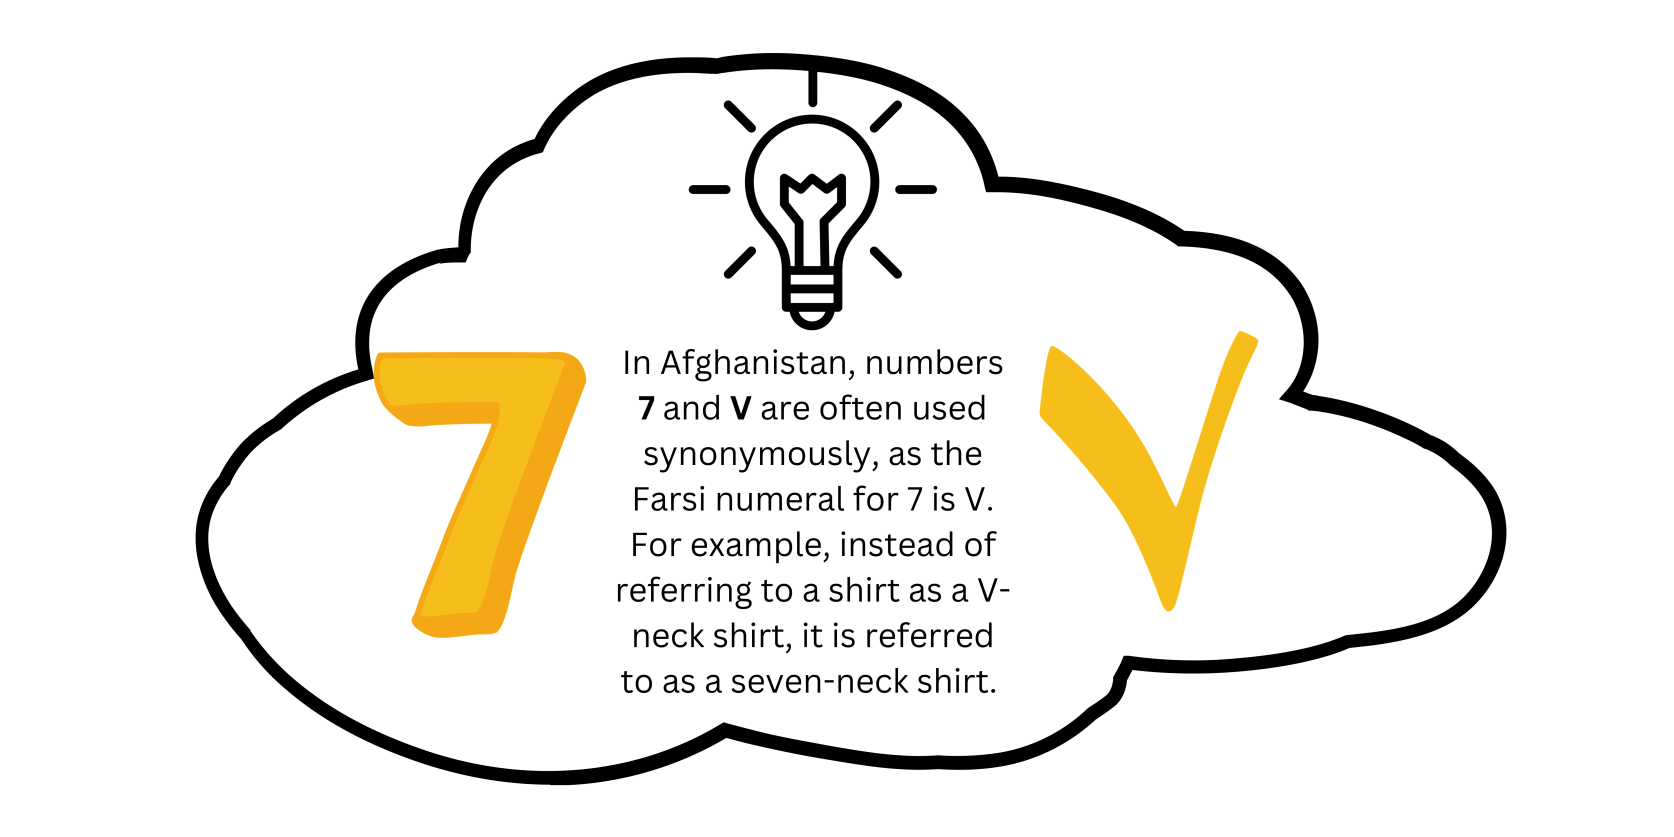 In Afghanistan, numbers 7 and V are often used synonymously, as the Farsi numeral for 7 is V. For example. instead of referring to a shirt as a V-neck shirt, it is referred to as a seven-neck shirt.